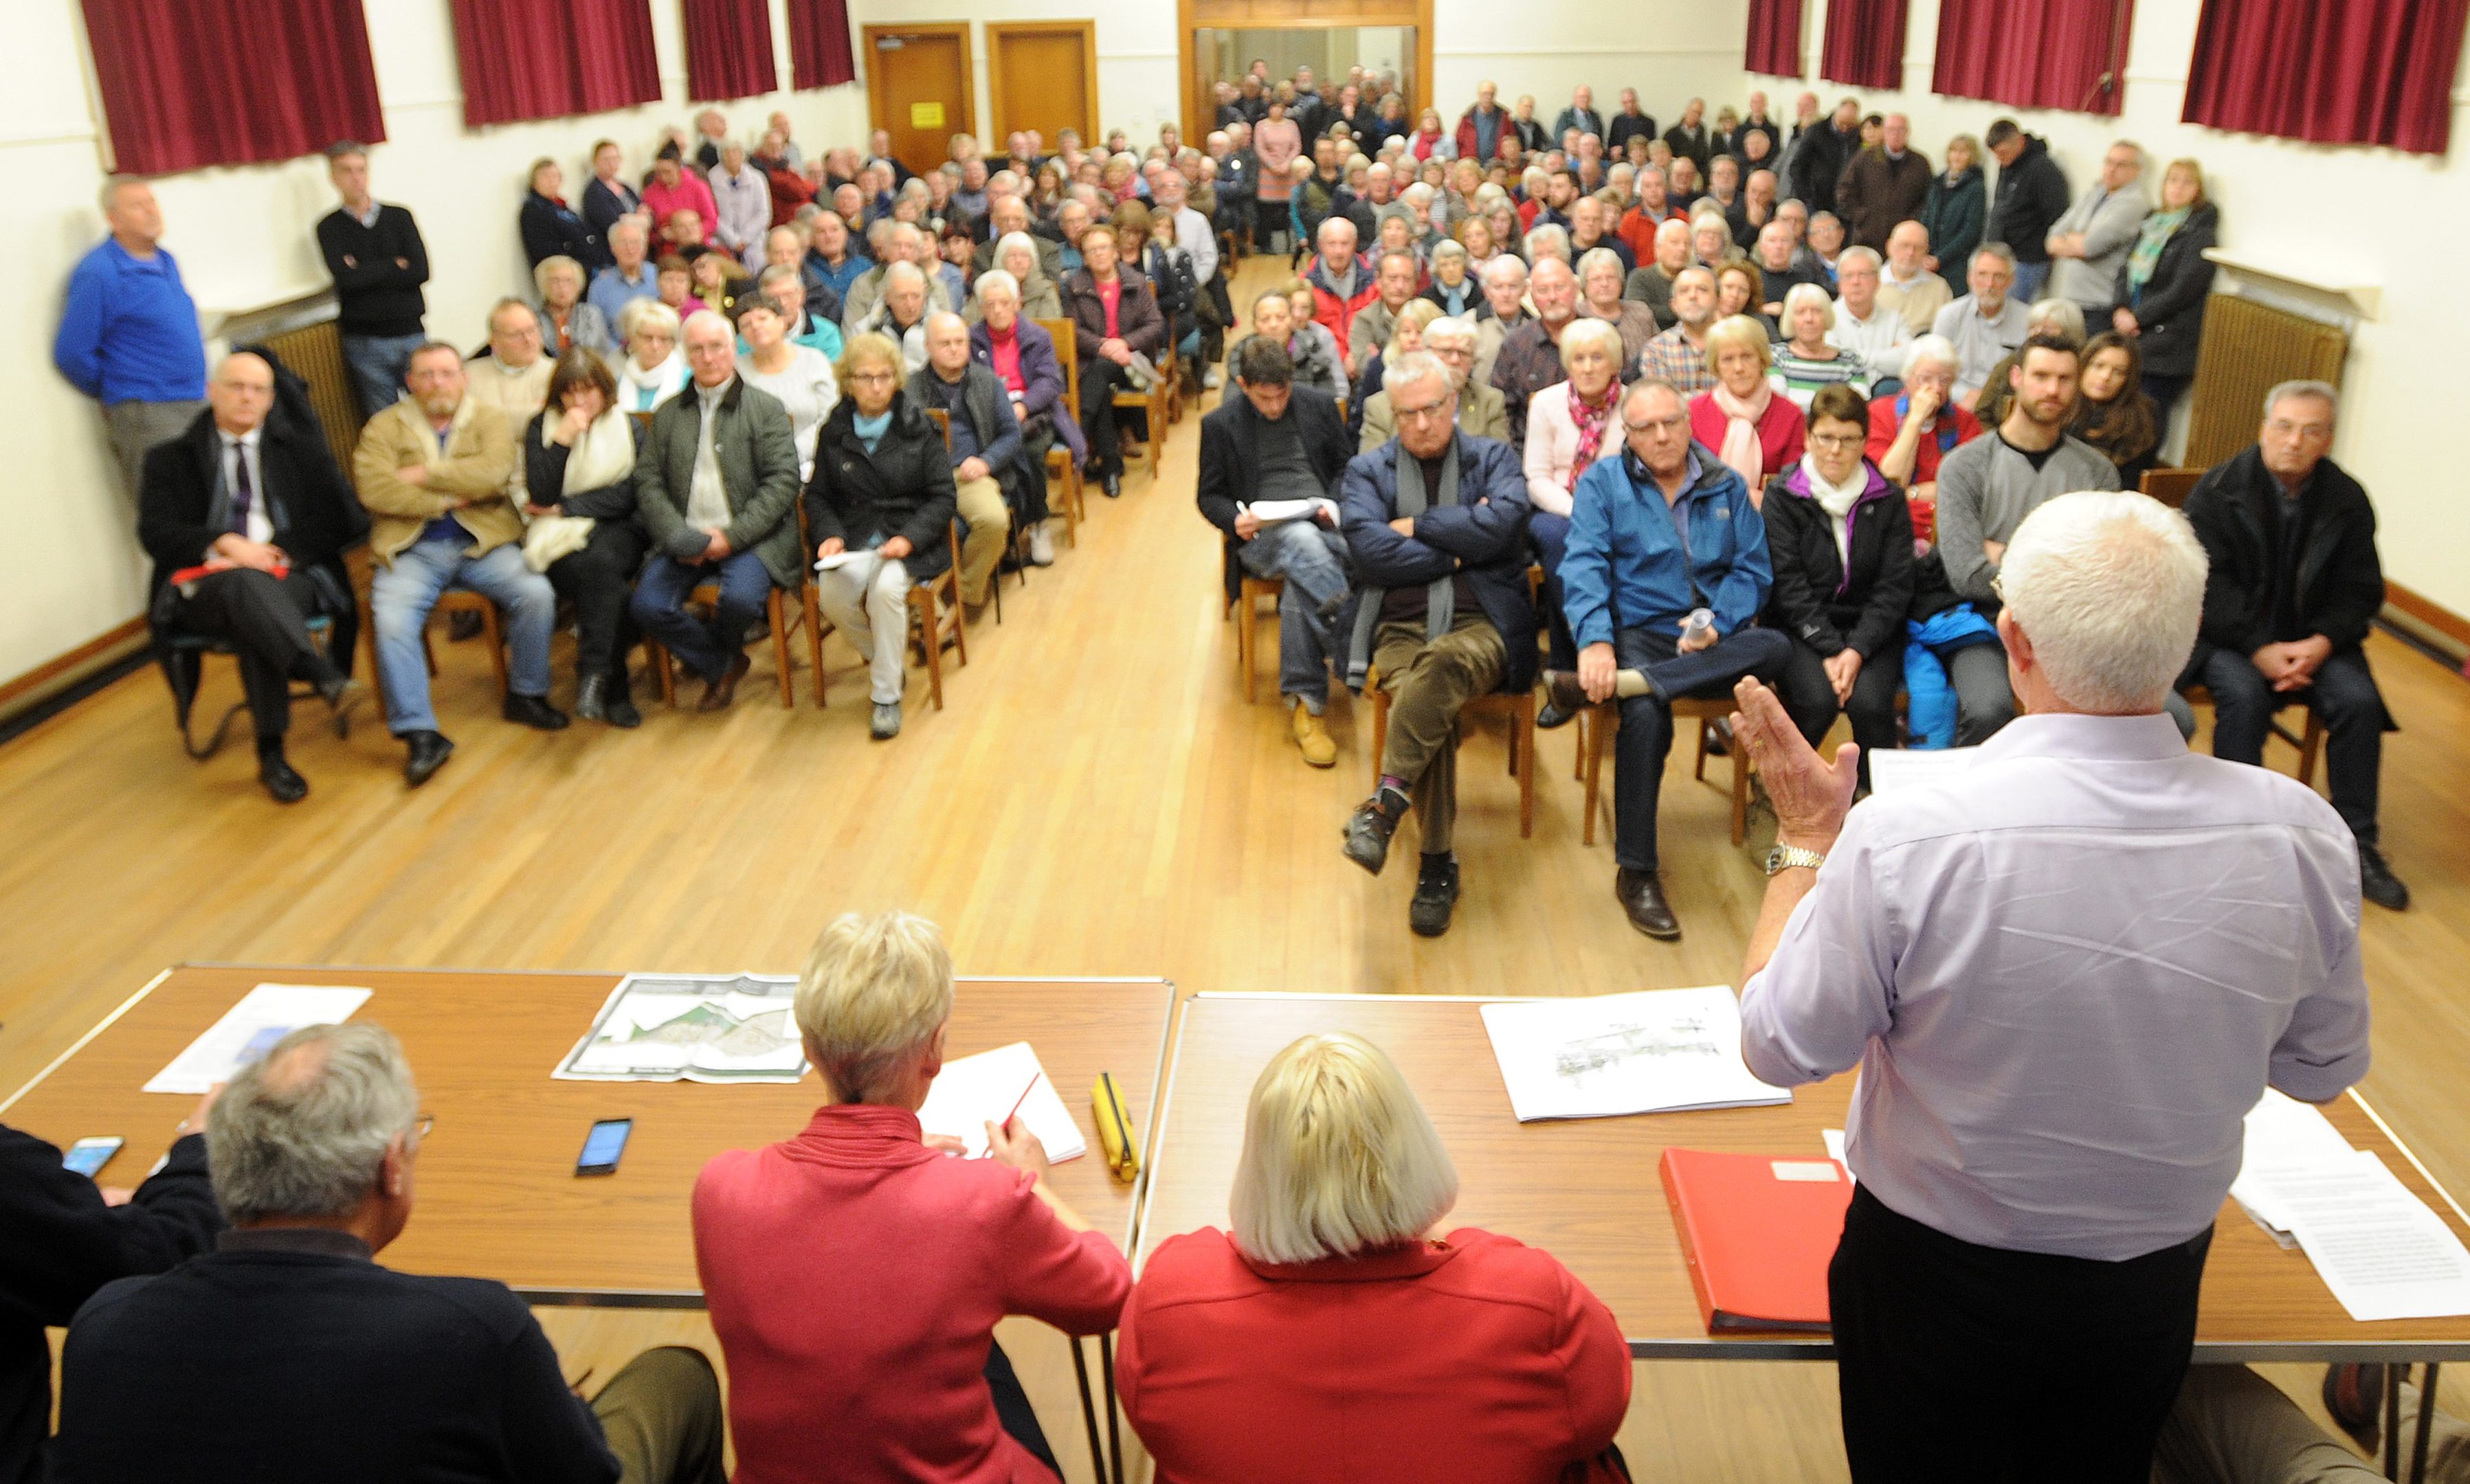 About 300 people attended talks in Scone over highly contentious housing plans